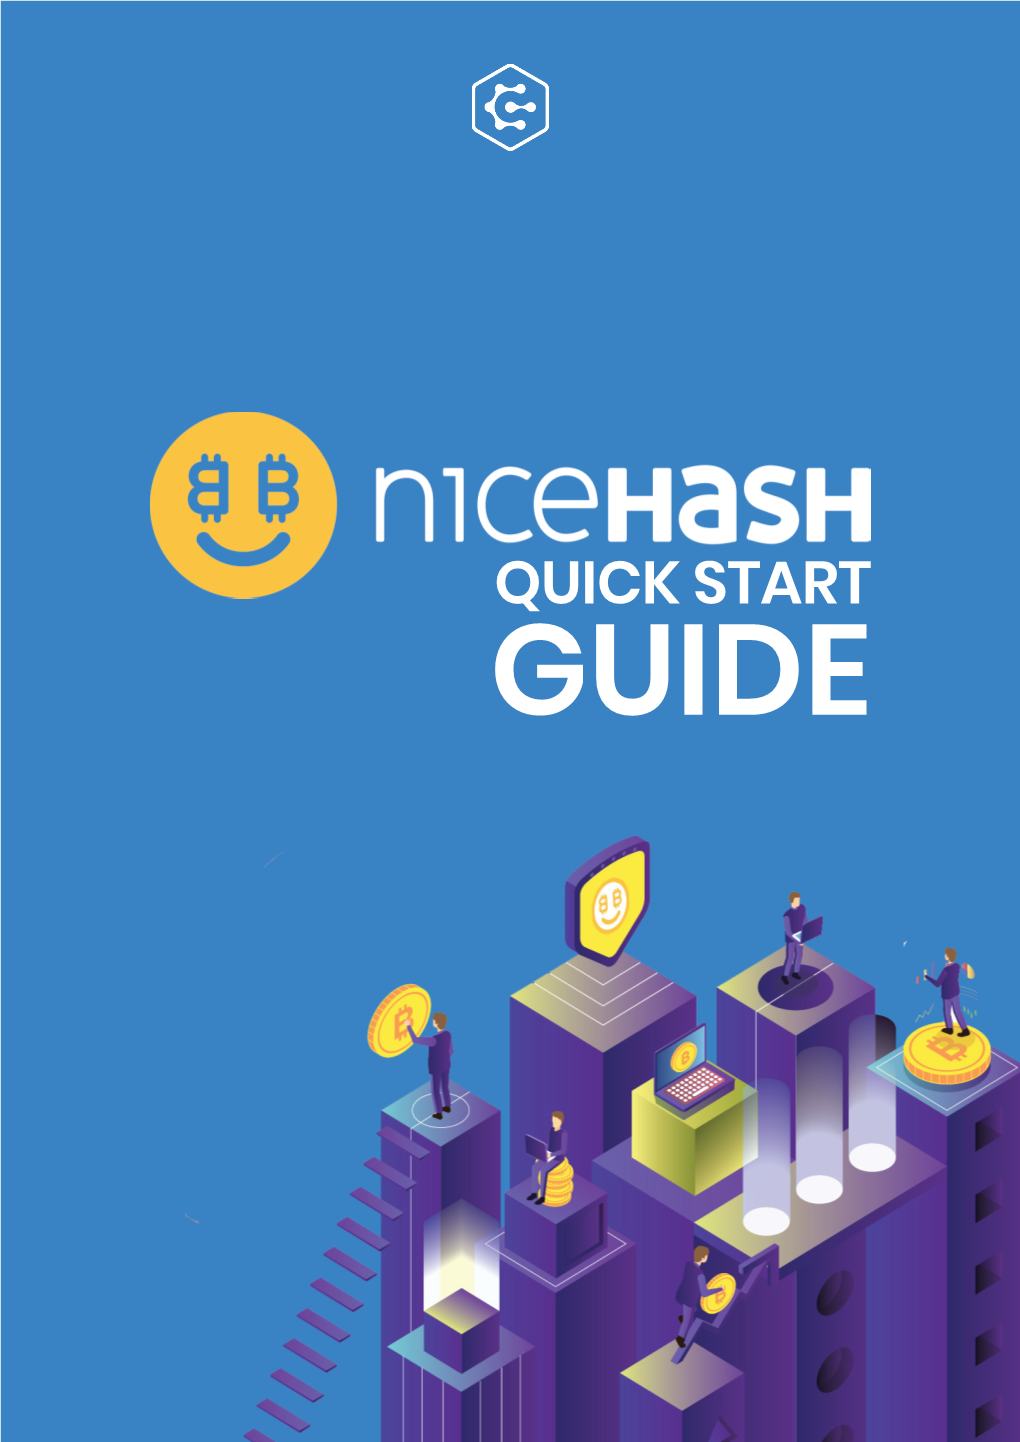 Quick Start Guide Summary Summary What Is Nicehash? 3